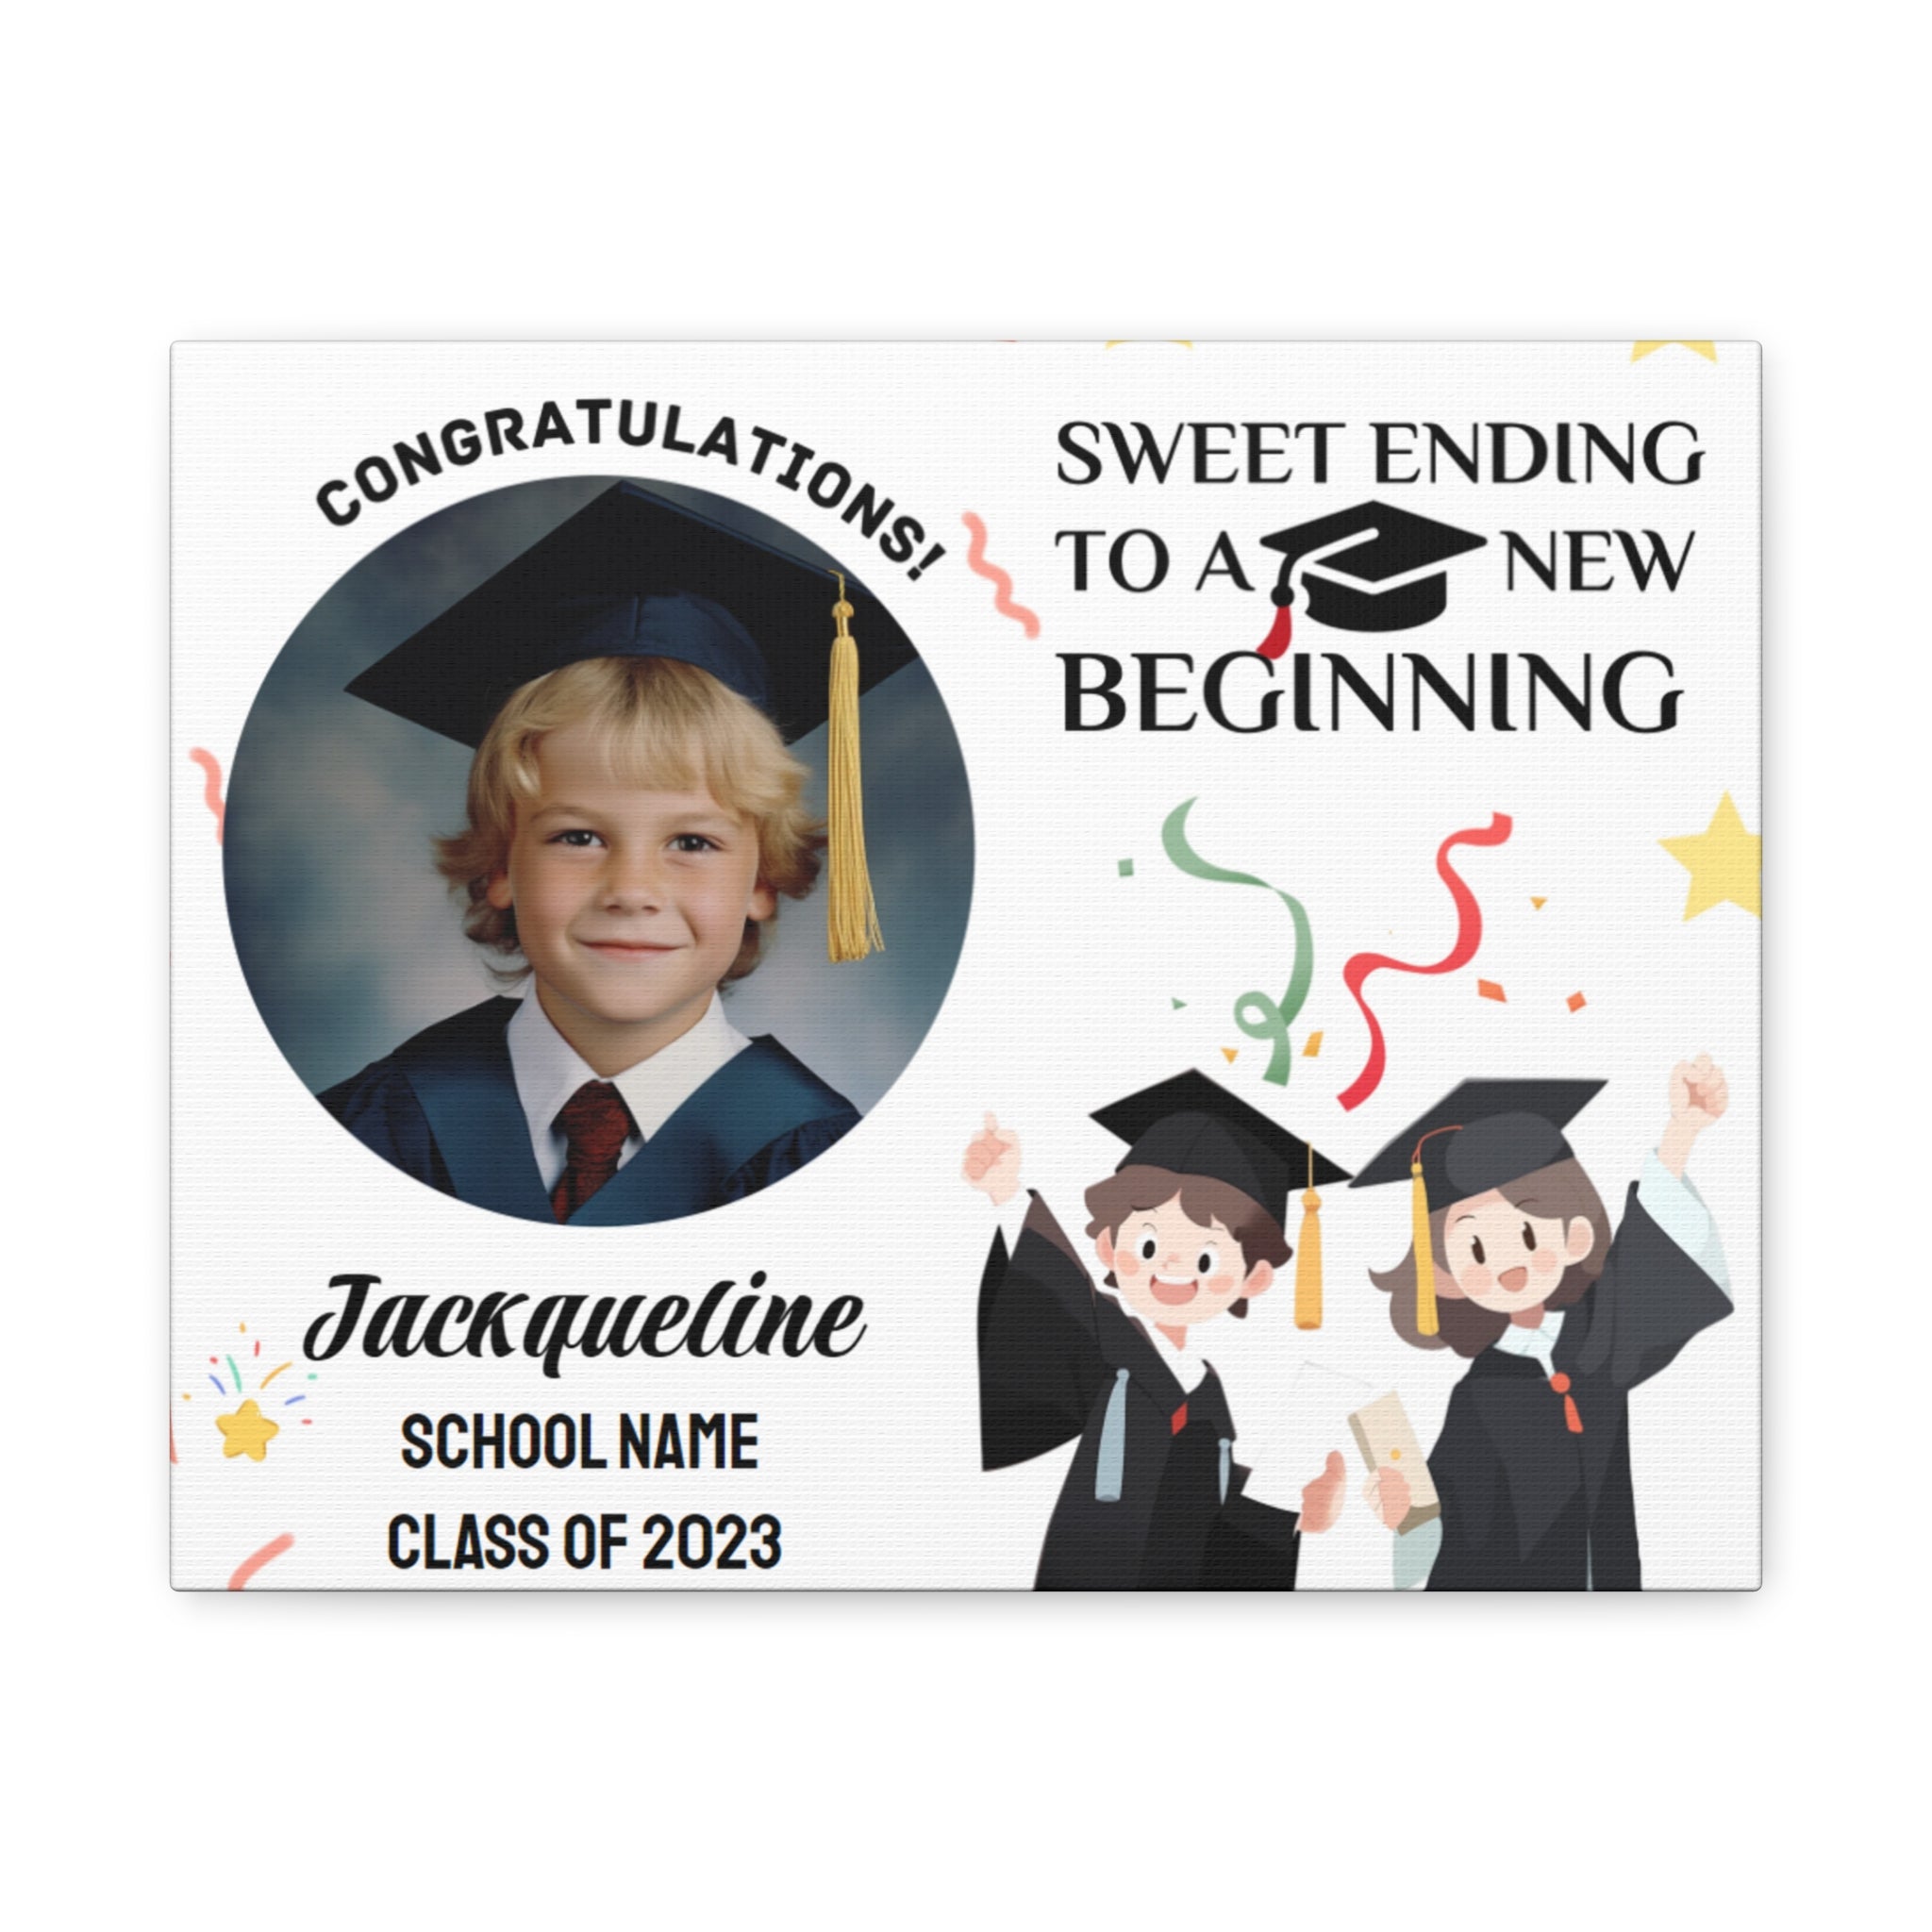 Sweet Ending to A New Beginning - Personalized Graduation Gifts